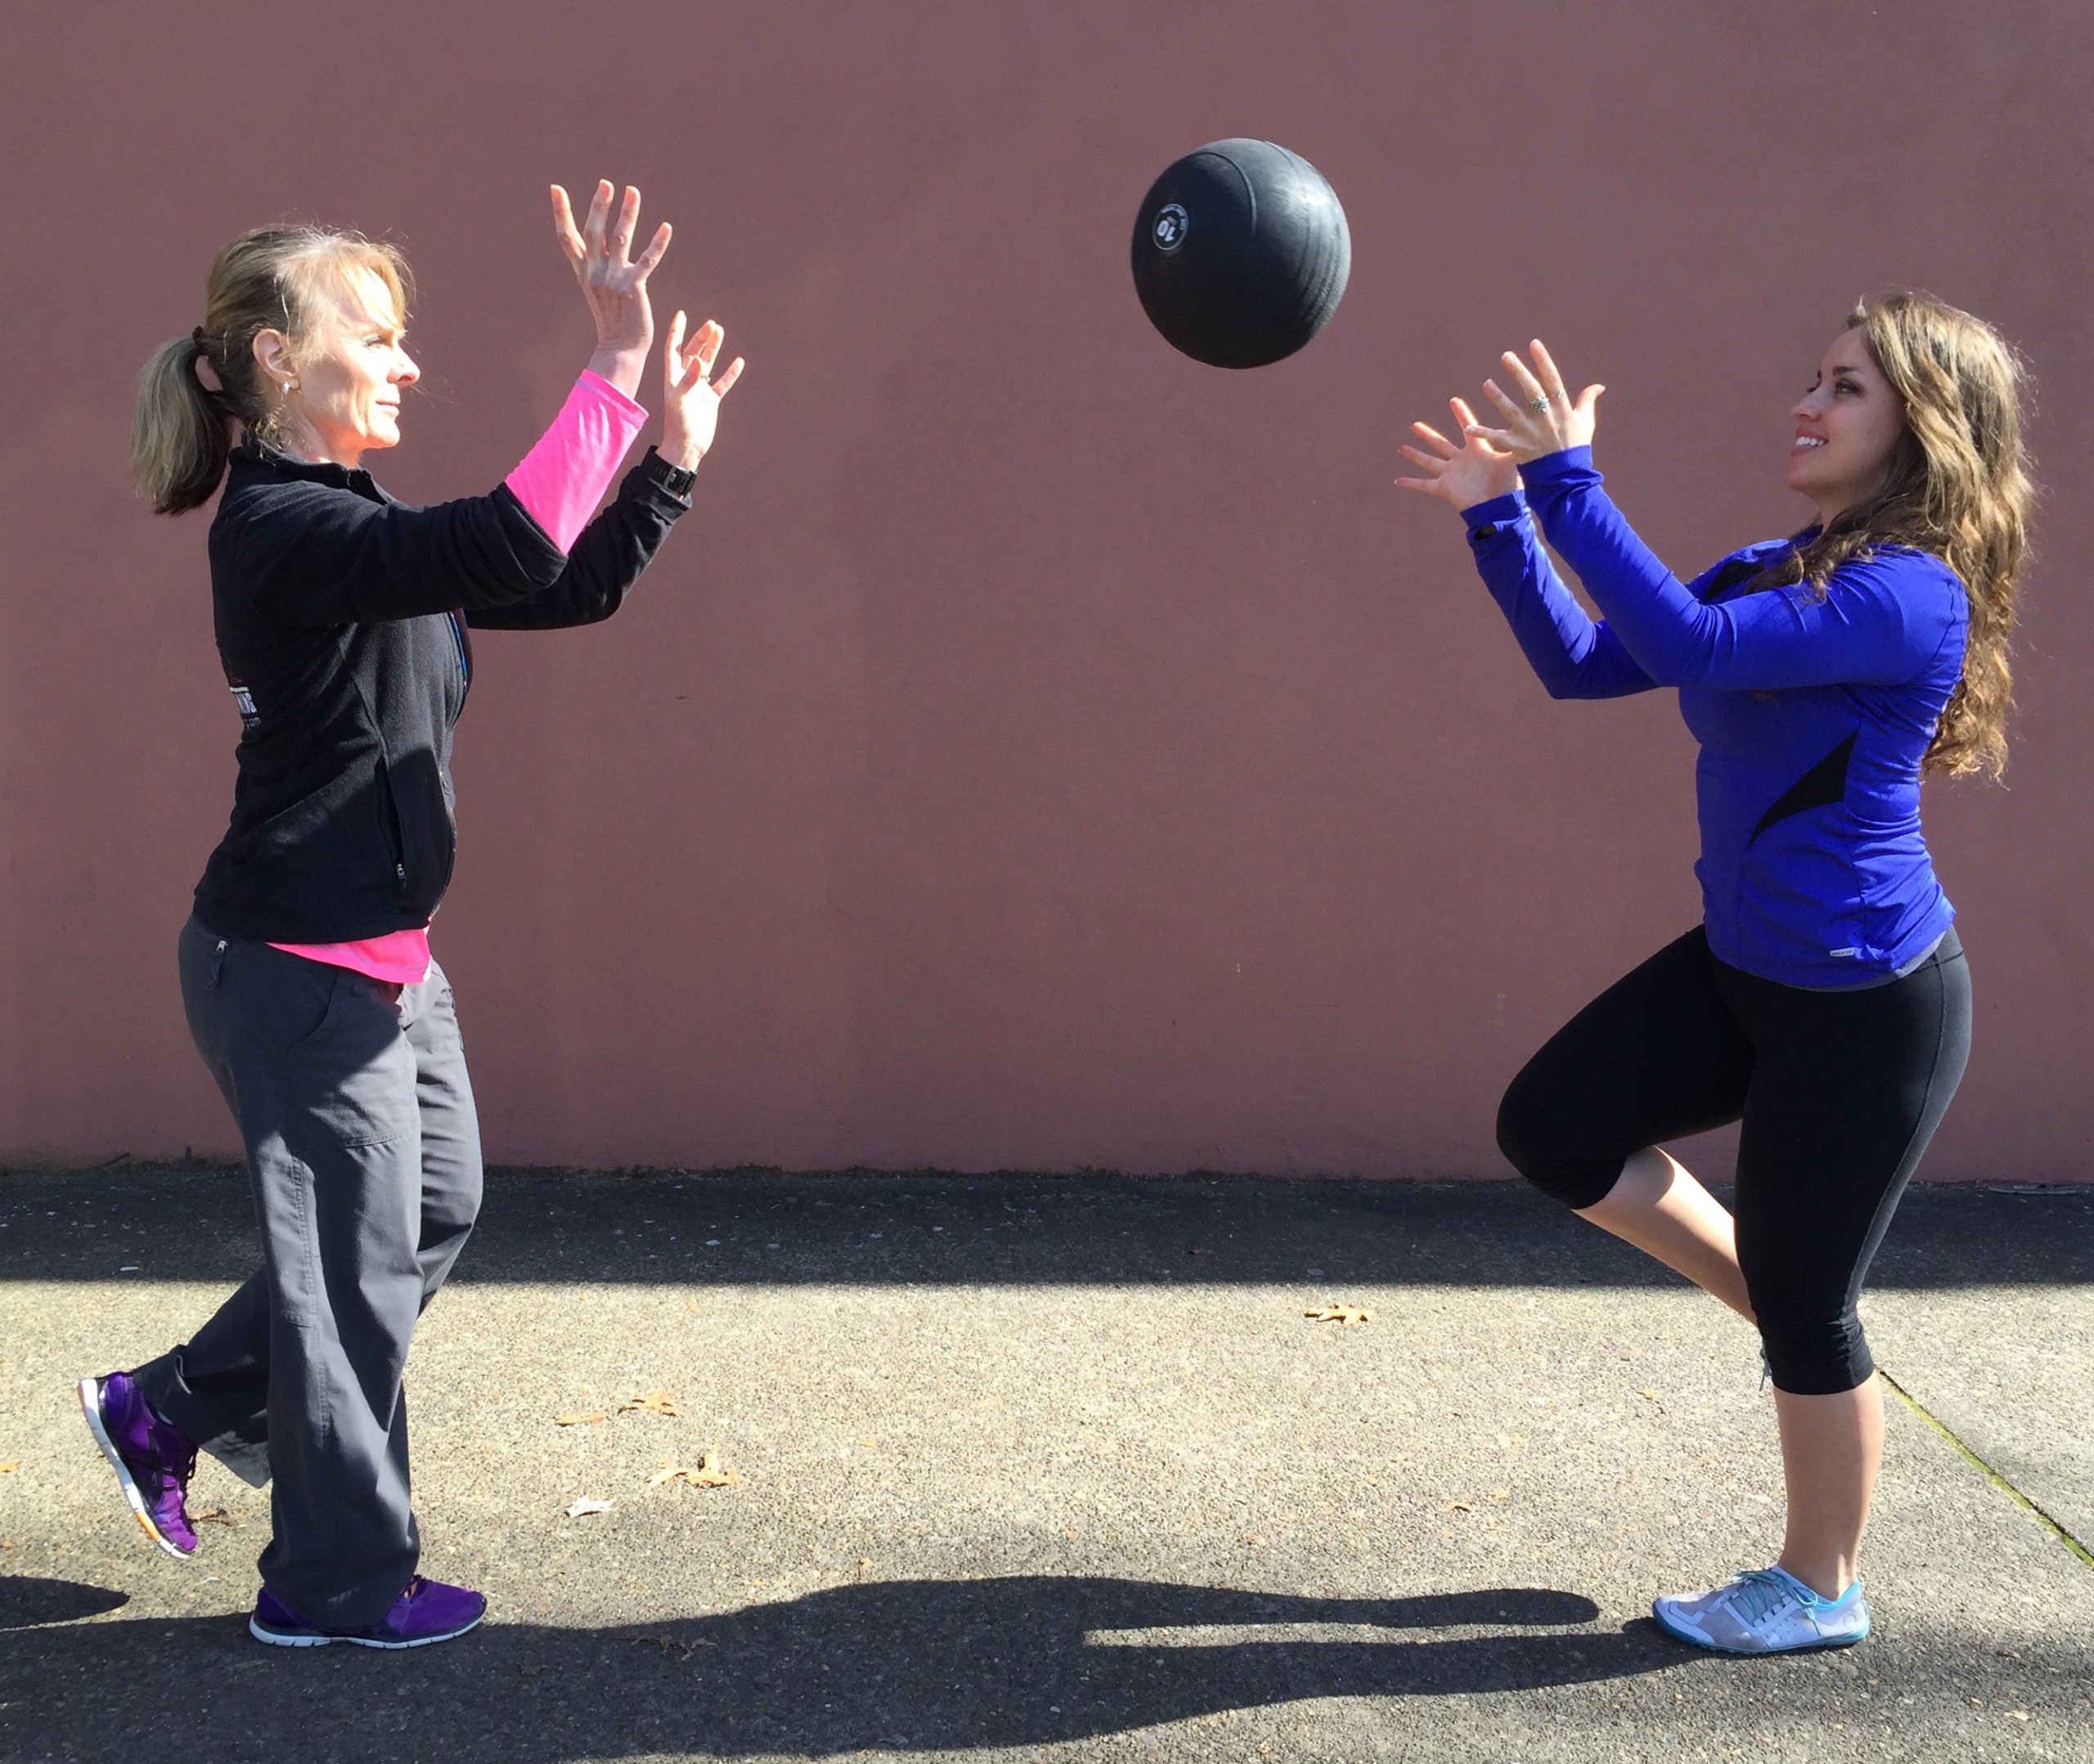 Medicine Ball Pass with a Squat - Personal Trainers, Exercise